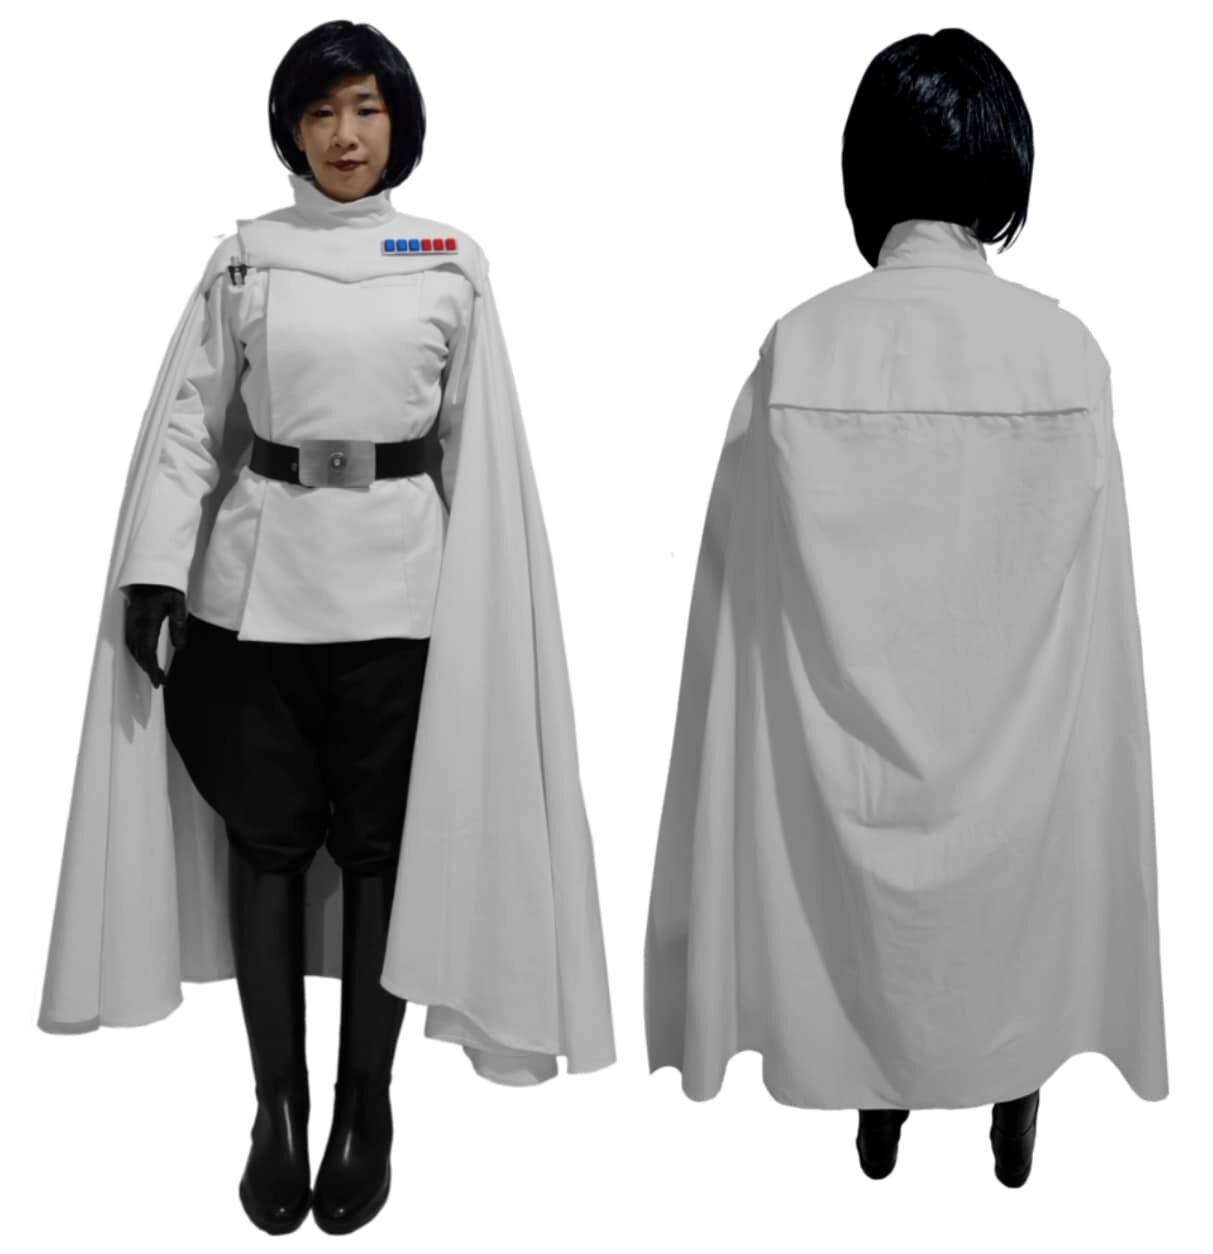 Attention All Commands! The Imperial Officer Corps is proud to announce another costume has been added to their CRL Library: Lieutenant Ochō from Star�� Wars: Visions!

Ochō was a human female who lived on the Outer Rim planet Tao during the Imperial